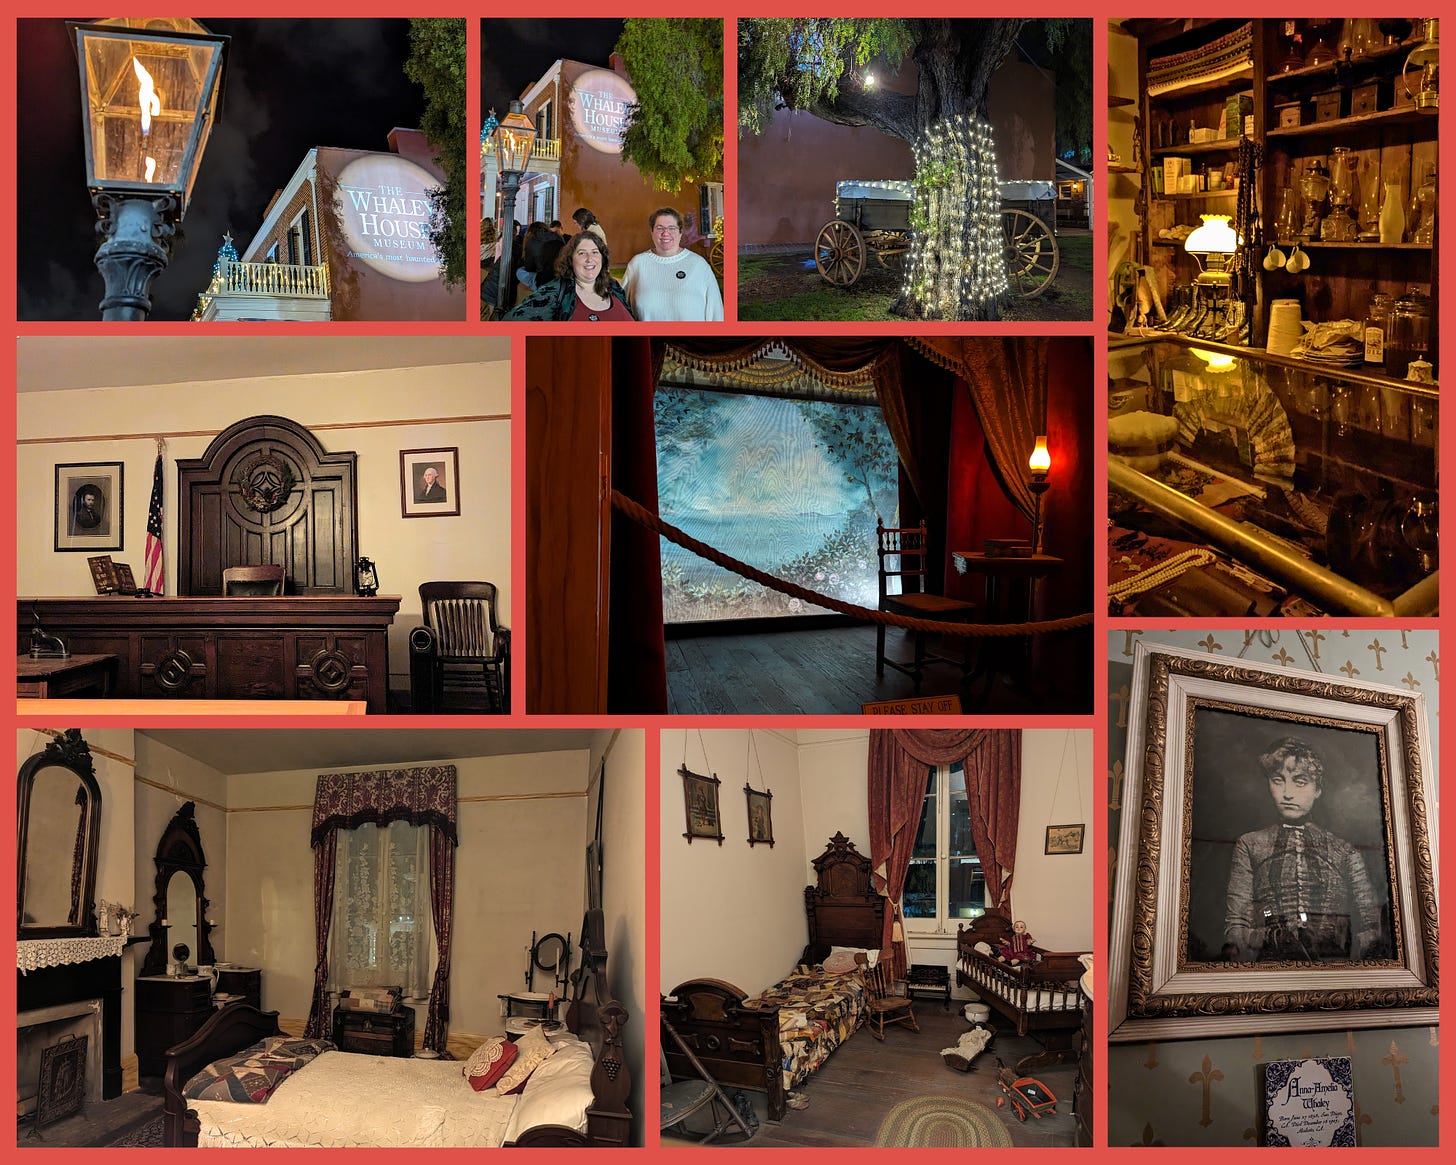 A collage of images from the Whaley House. Starting from the top left: a flame lamp and the side of the Whaley house, a picture of two women standing underneath a sign that says "The Whaley House", a pepper tree with lights around it, a picture of the general store, in the center is the stage inside the house, then the courtroom, on the bottom row is two bedrooms and a framed photo of one of the Whaley family